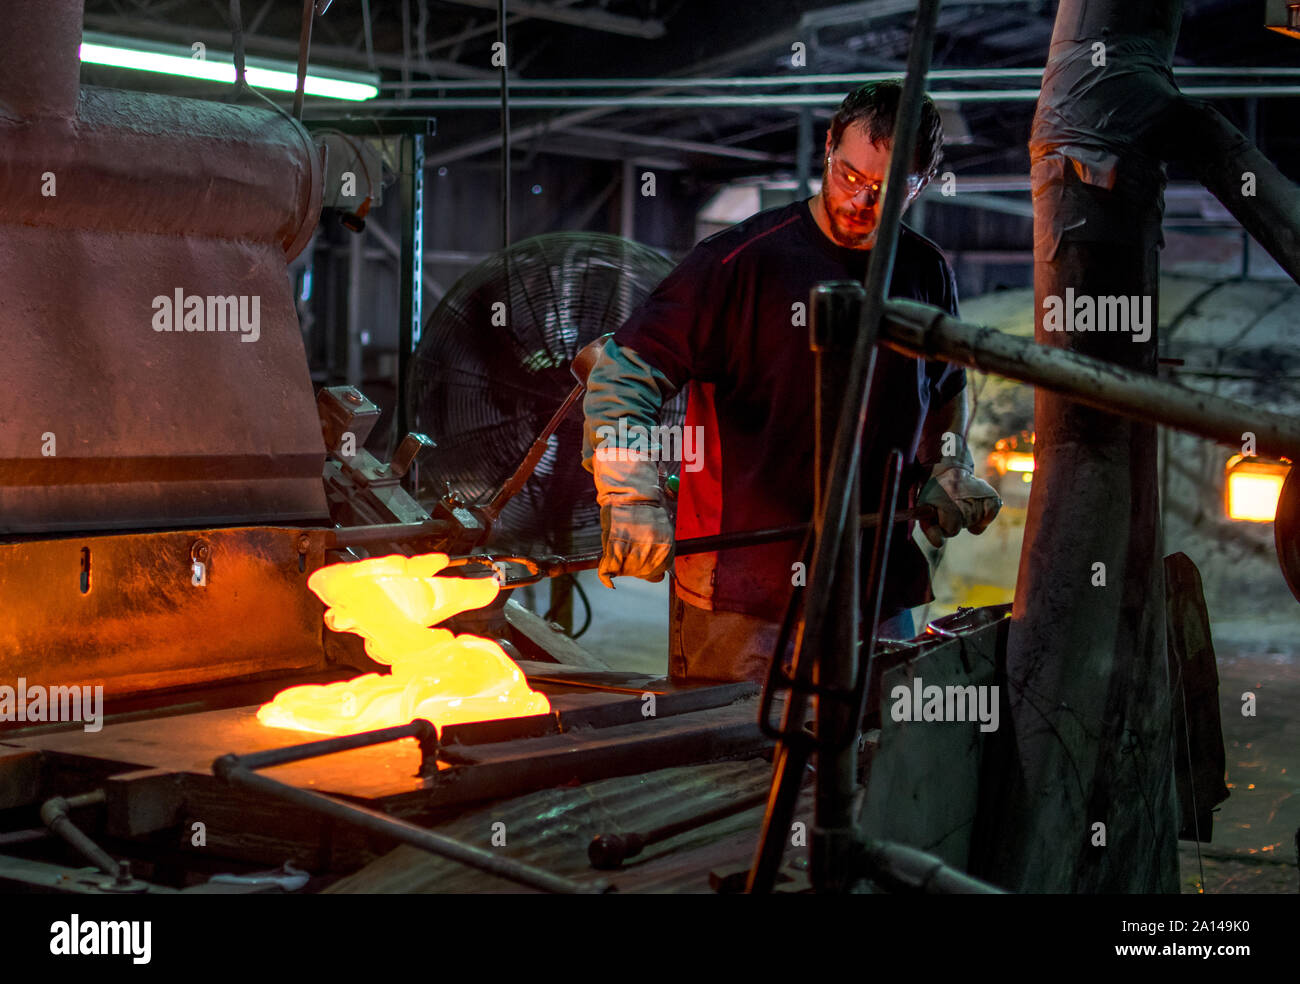 Sept 27 2019 Kokomo Indiana USA; this glass worker is mixing molten hot glass, which will soon be turned into stained glass sheets. although difficult Stock Photo